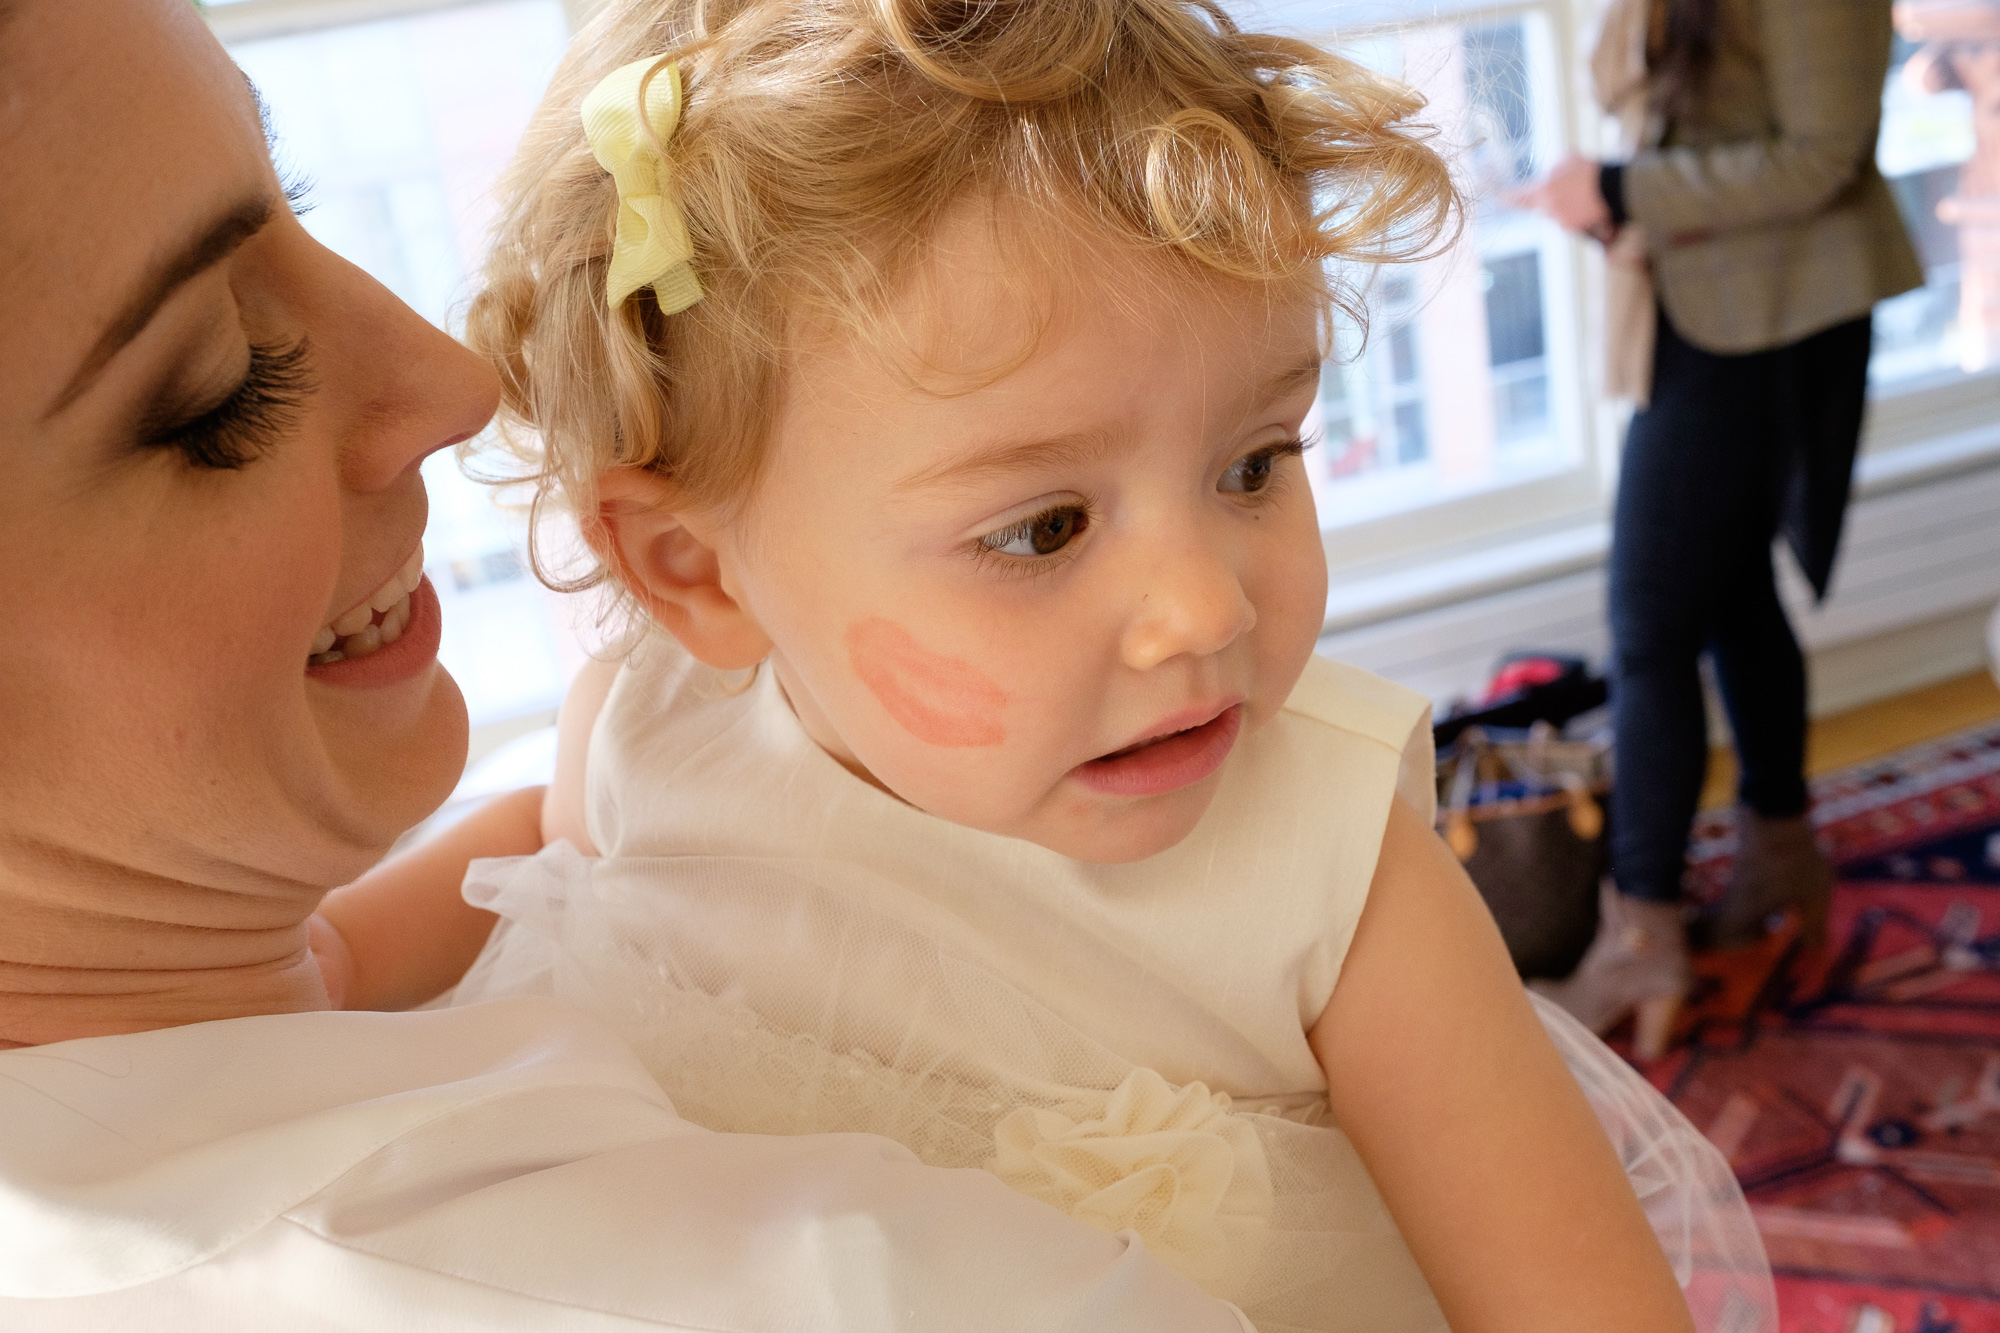  The bride leaves a lipstick kiss on the cheek of her adorable flower girl while getting ready at the Gladstone Hotel. 